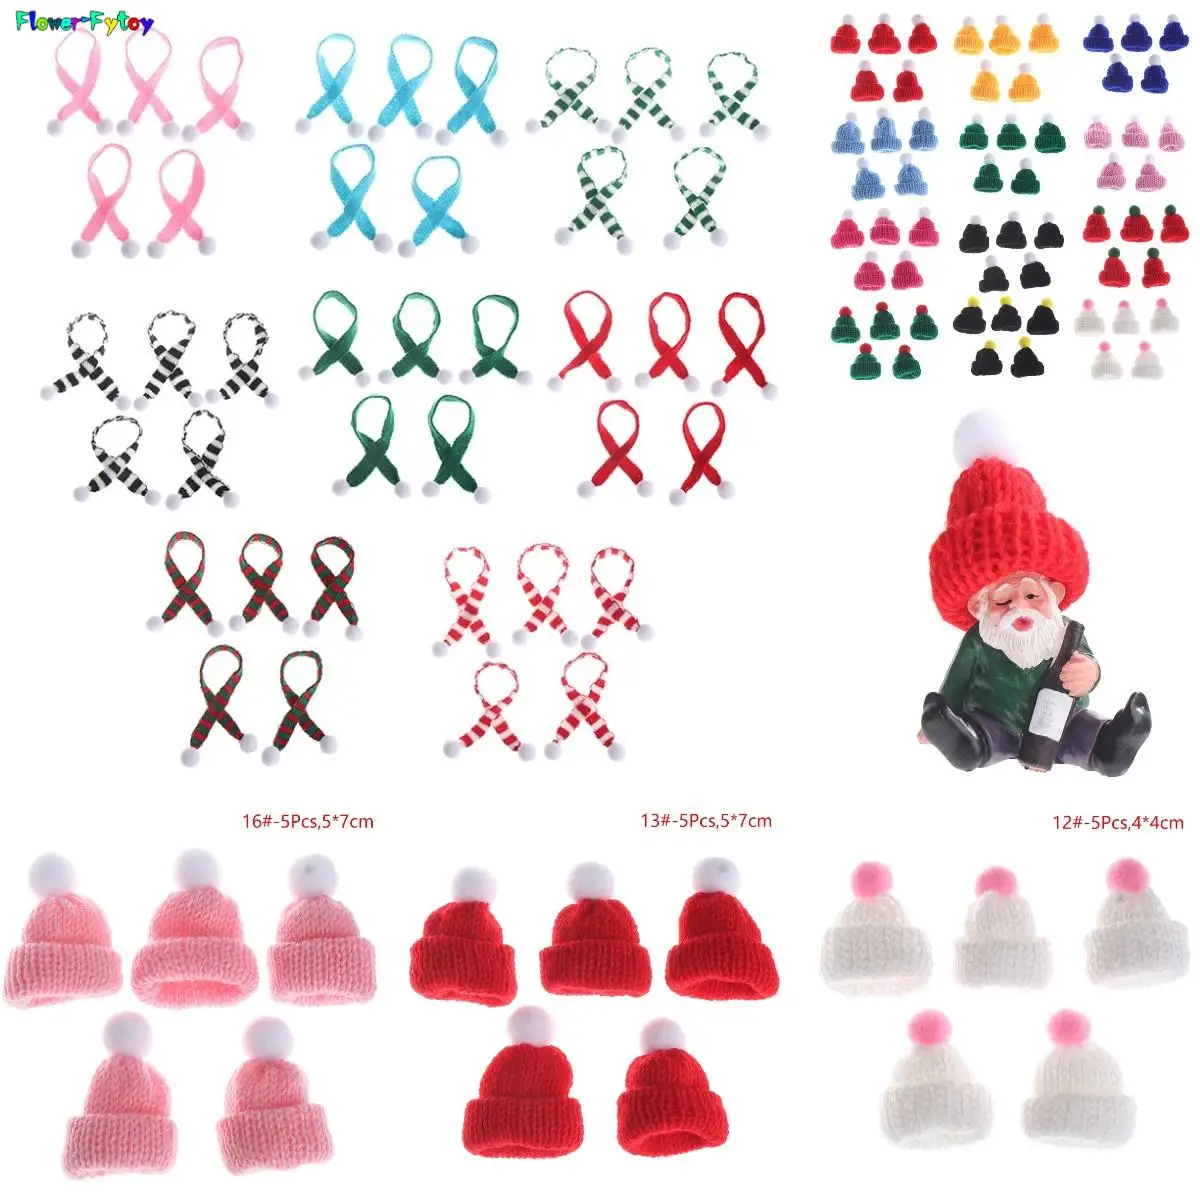 Dollhouse mini knitted sweater hat scarf shoes christmas doll clothes dolls accessories thumb200